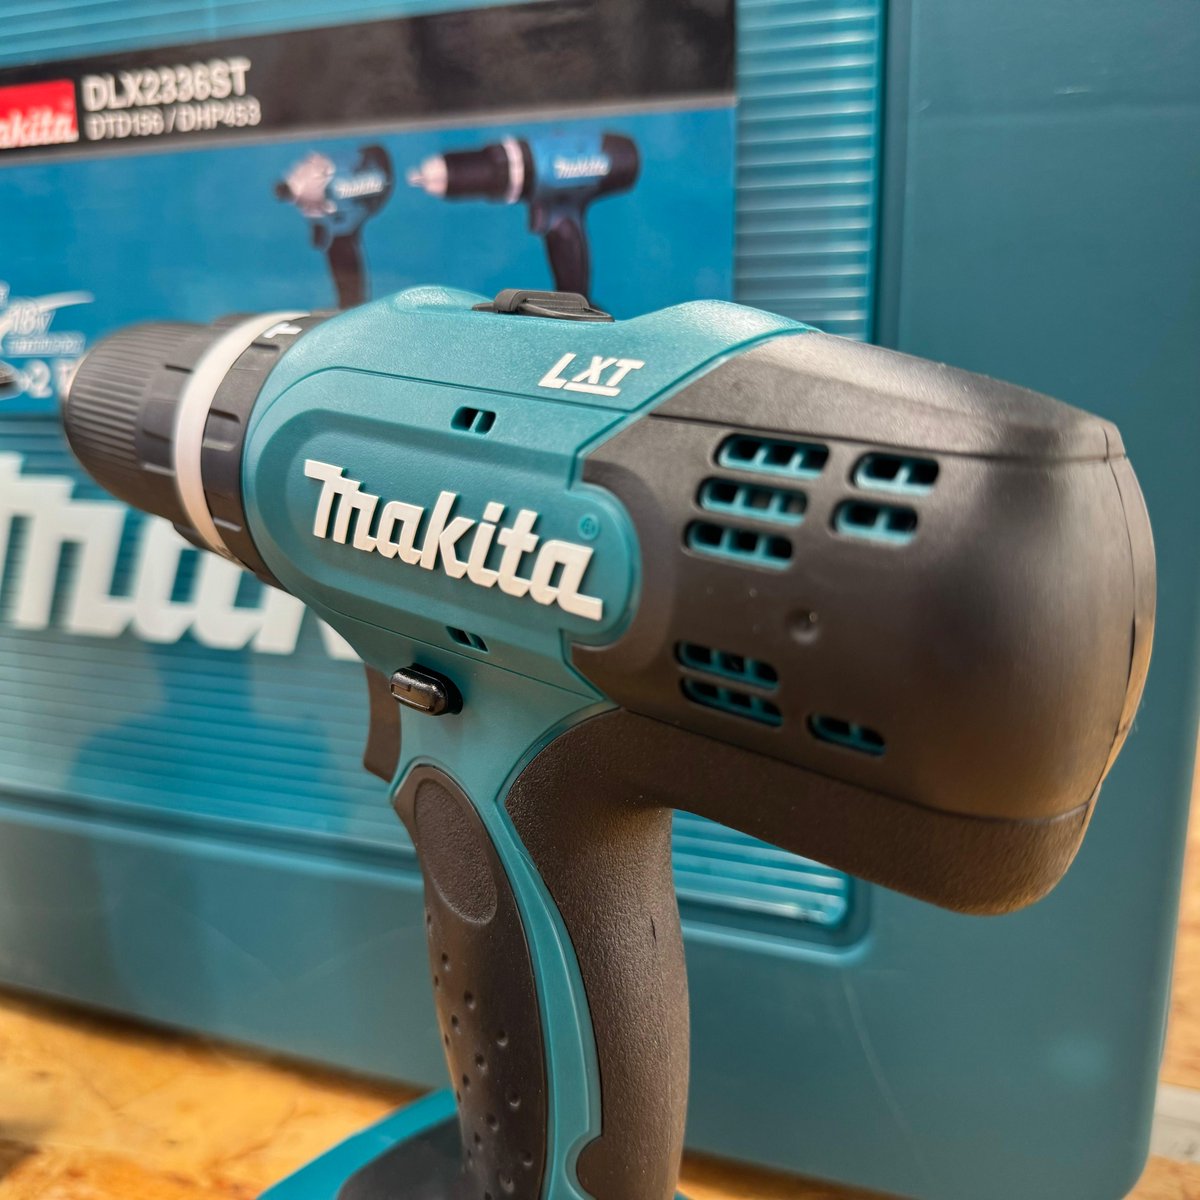 The Makita cordless twin pack, with a cordless combi drill and compact impact driver 👌. Get it here: bit.ly/3UUWQ27